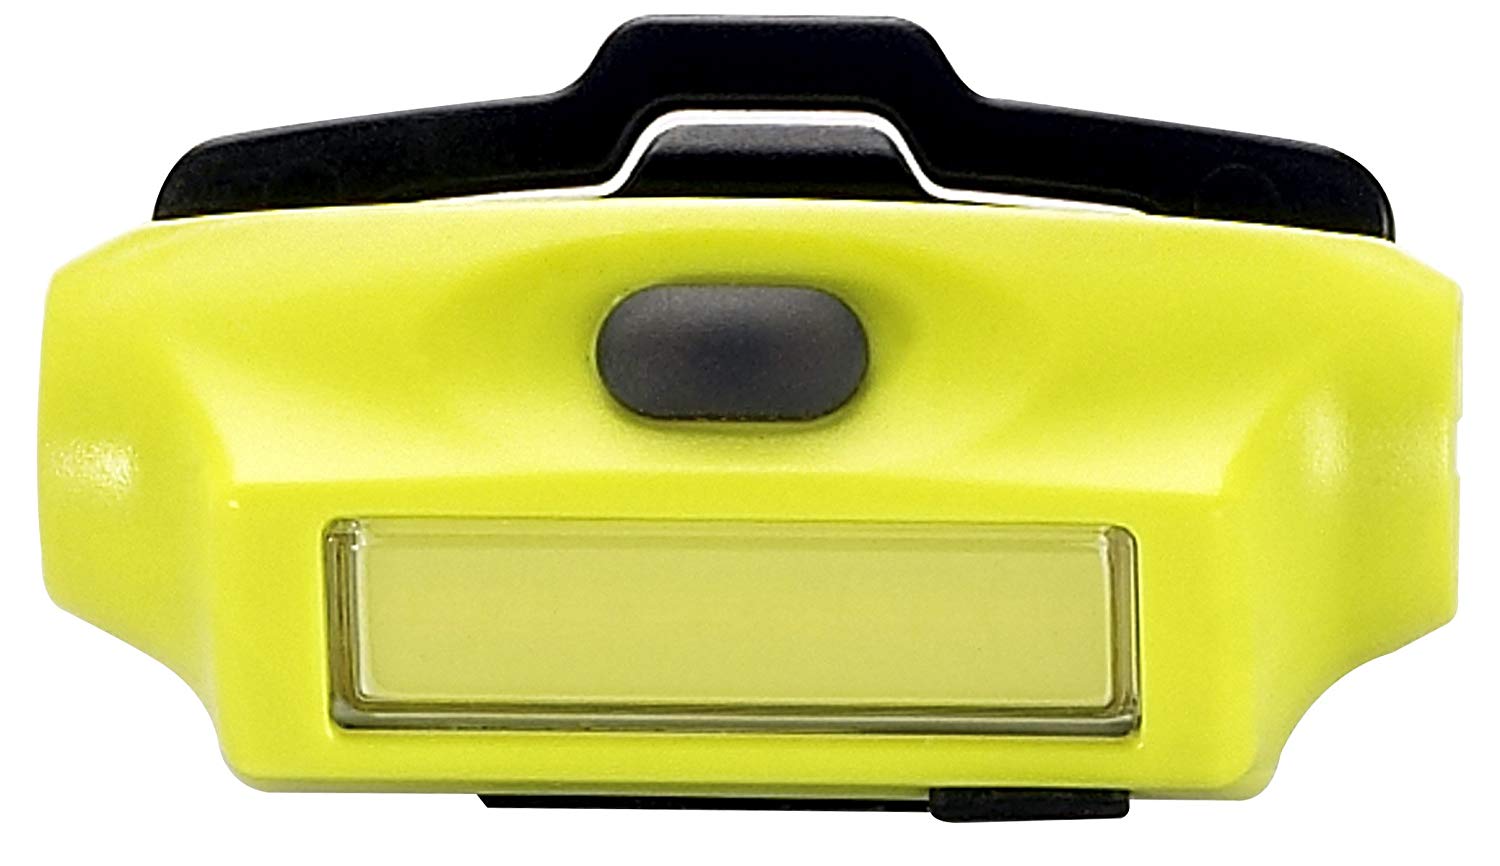 Streamlight 61700 Bandit LED Rechargeable Headlamp. Yellow w/White LED. One Size - MPR Tools & Equipment